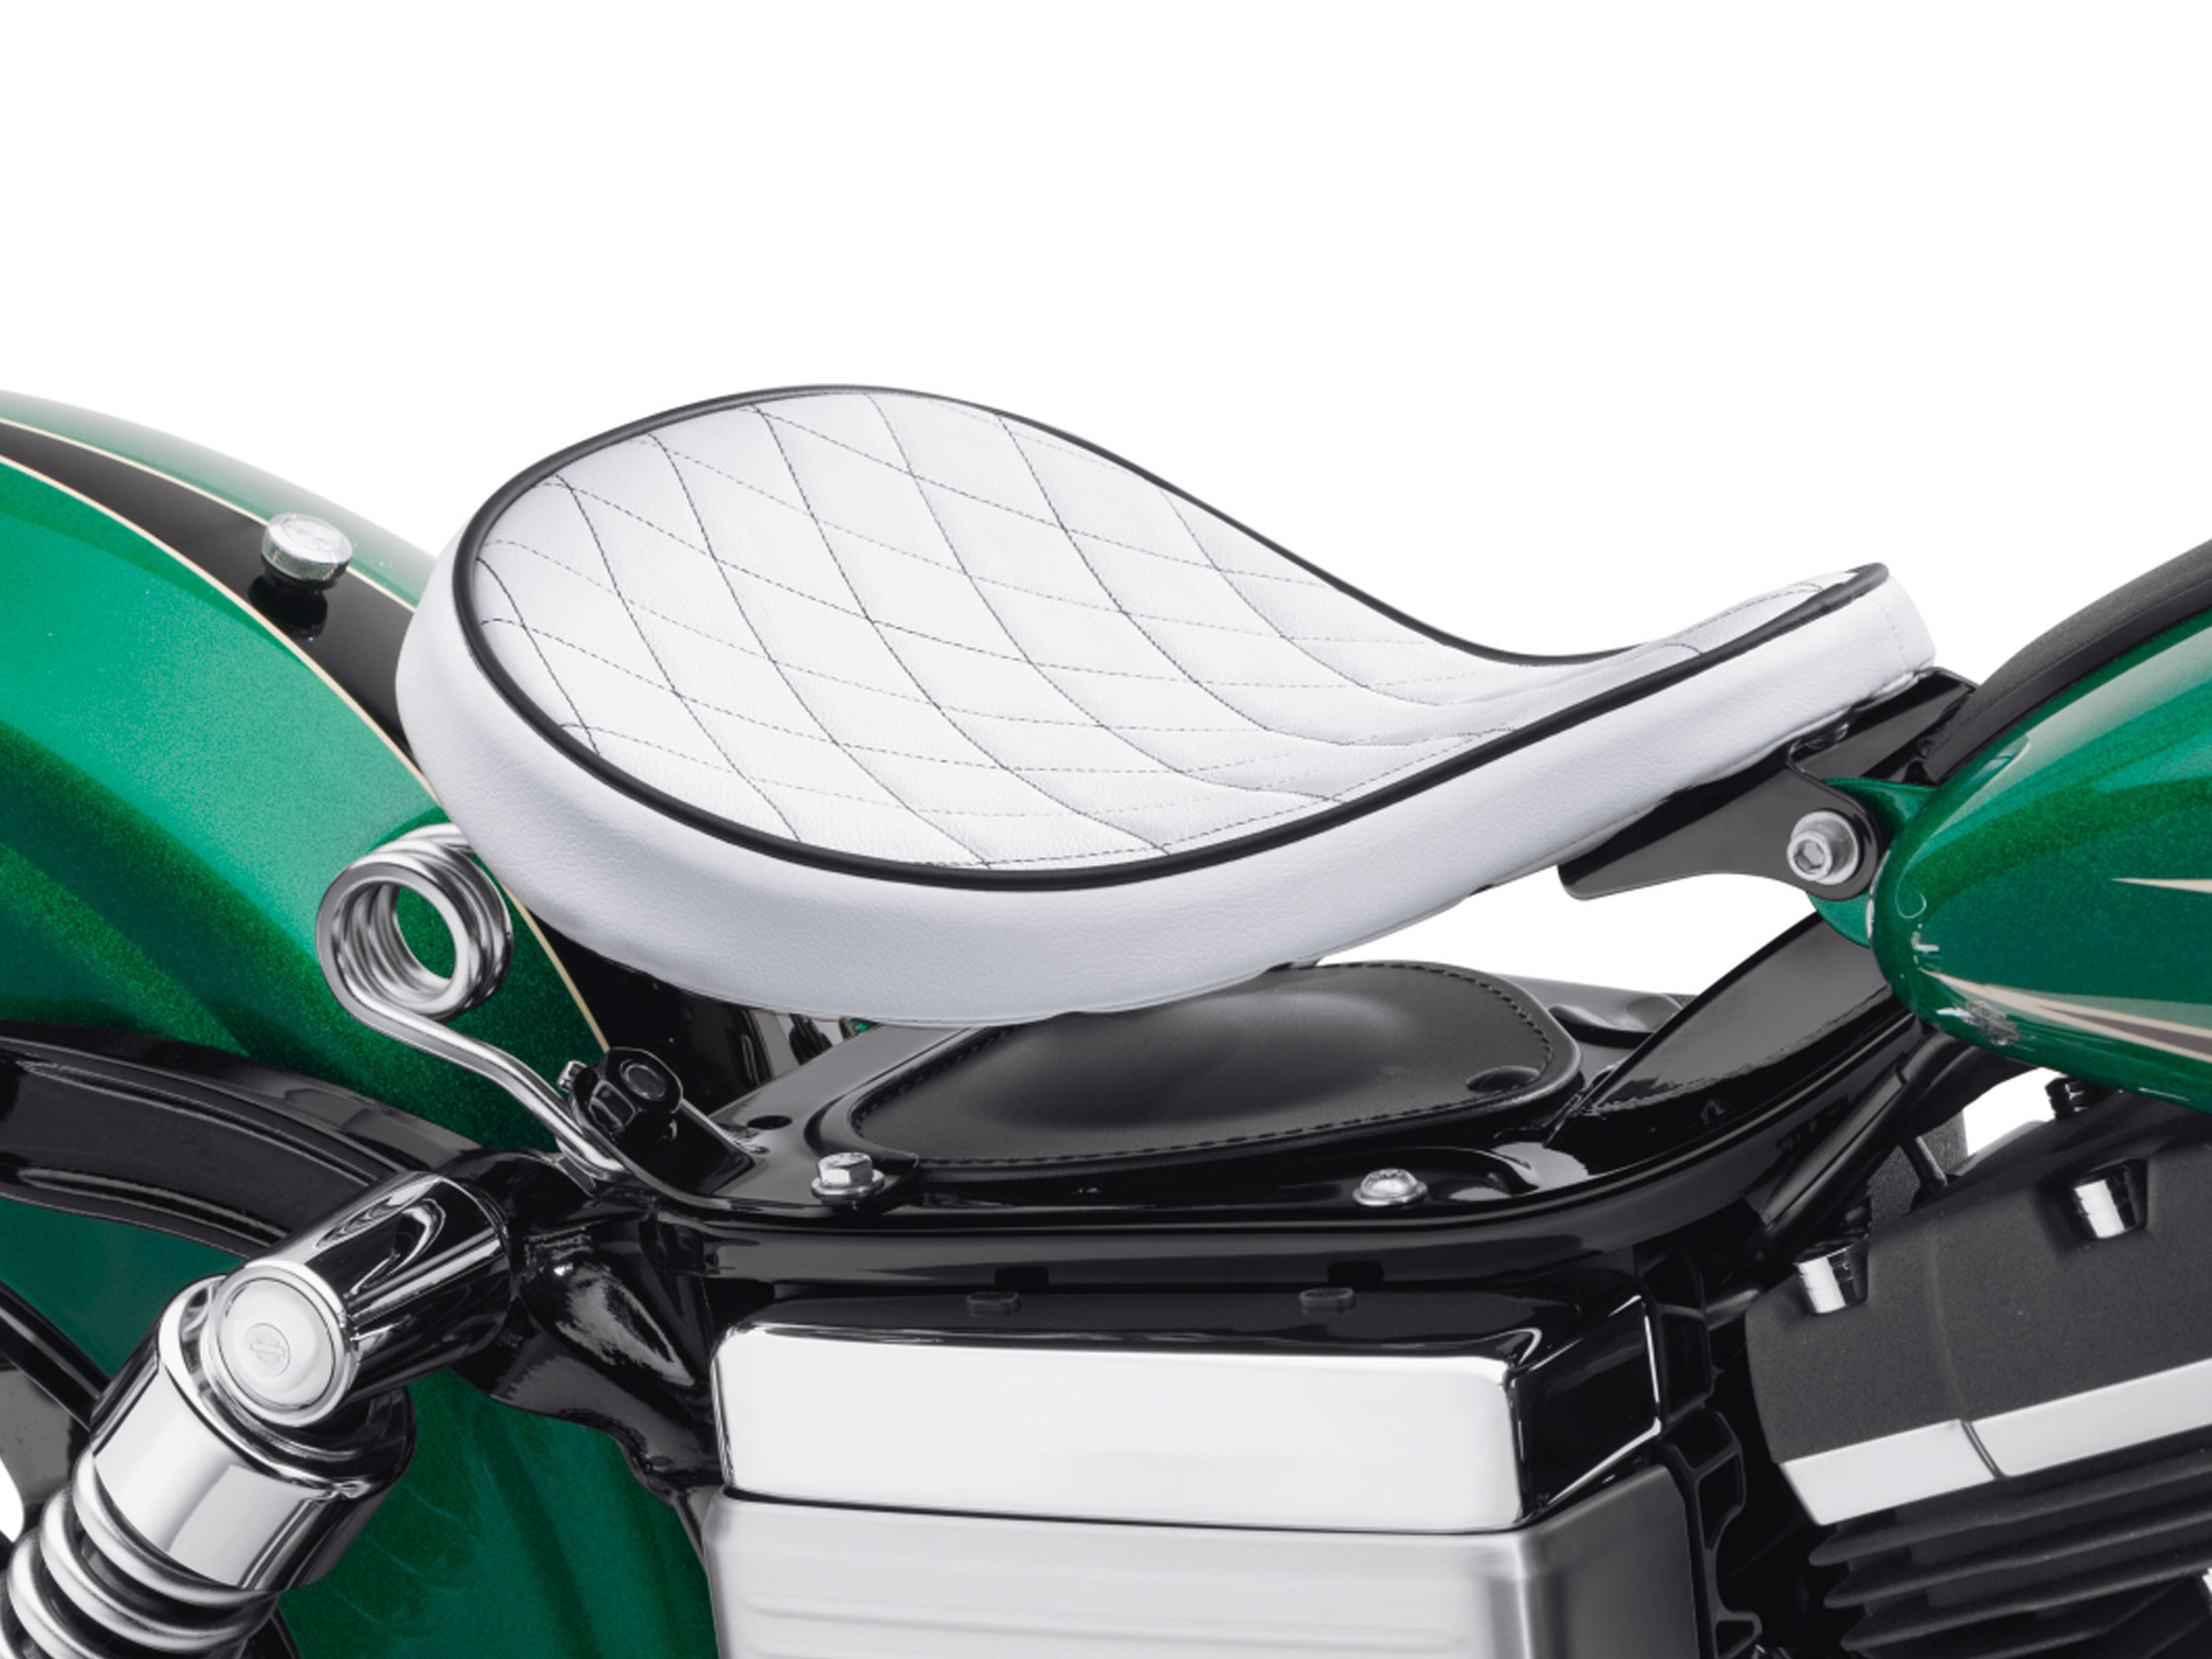 SOLO SPRING SADDLE - WHITE DIAMOND - Sportster, Dyna, Softail 52000275 /  Seats / Multi-fit / Parts & Accessories / - House-of-Flames Harley-Davidson